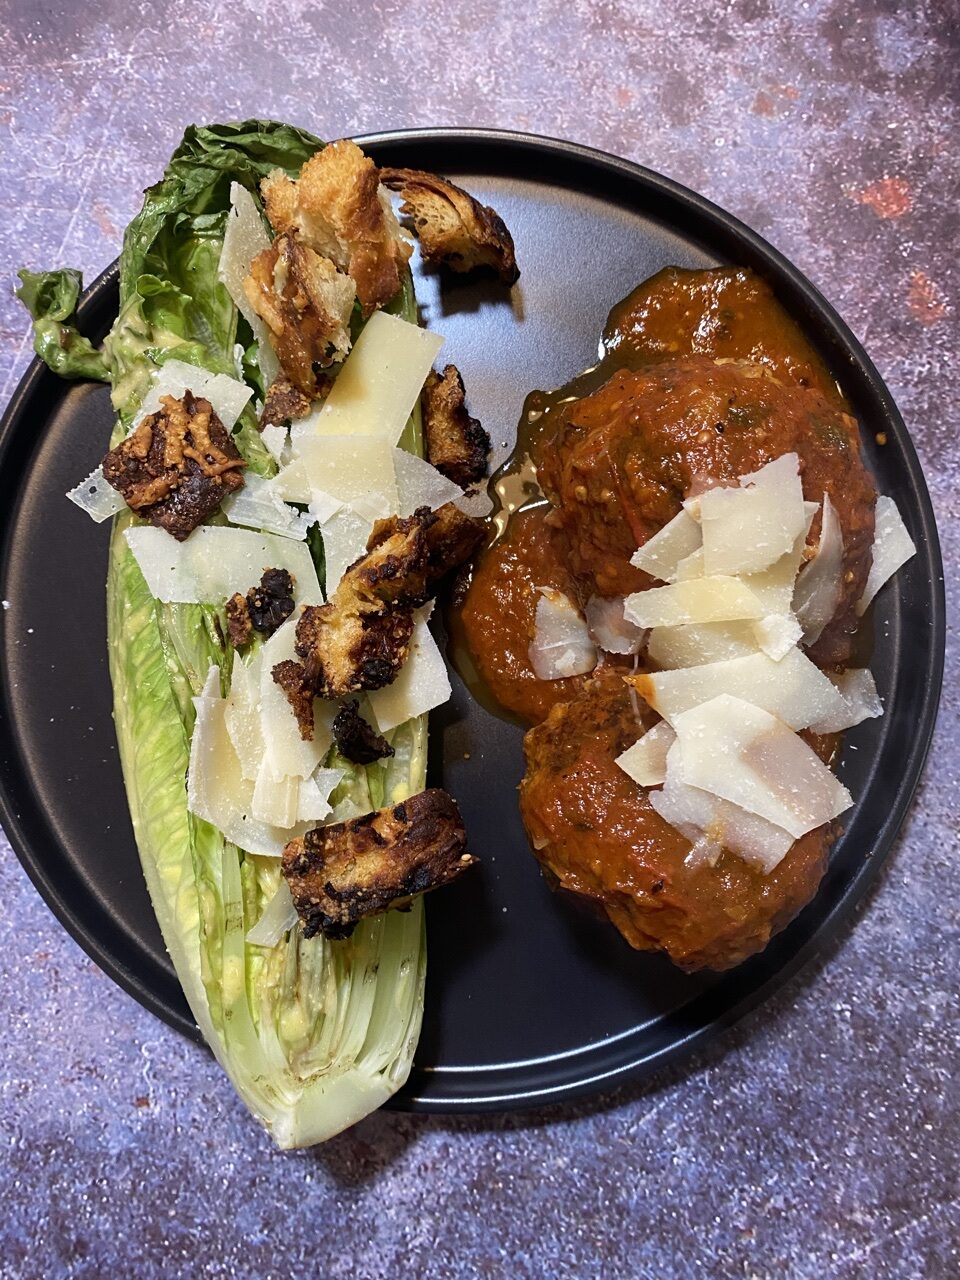 006612BD D06C 44E9 9206 8BC0C5787A9C e1600362435537 - The Best Sunday Meatballs with Grilled Romaine